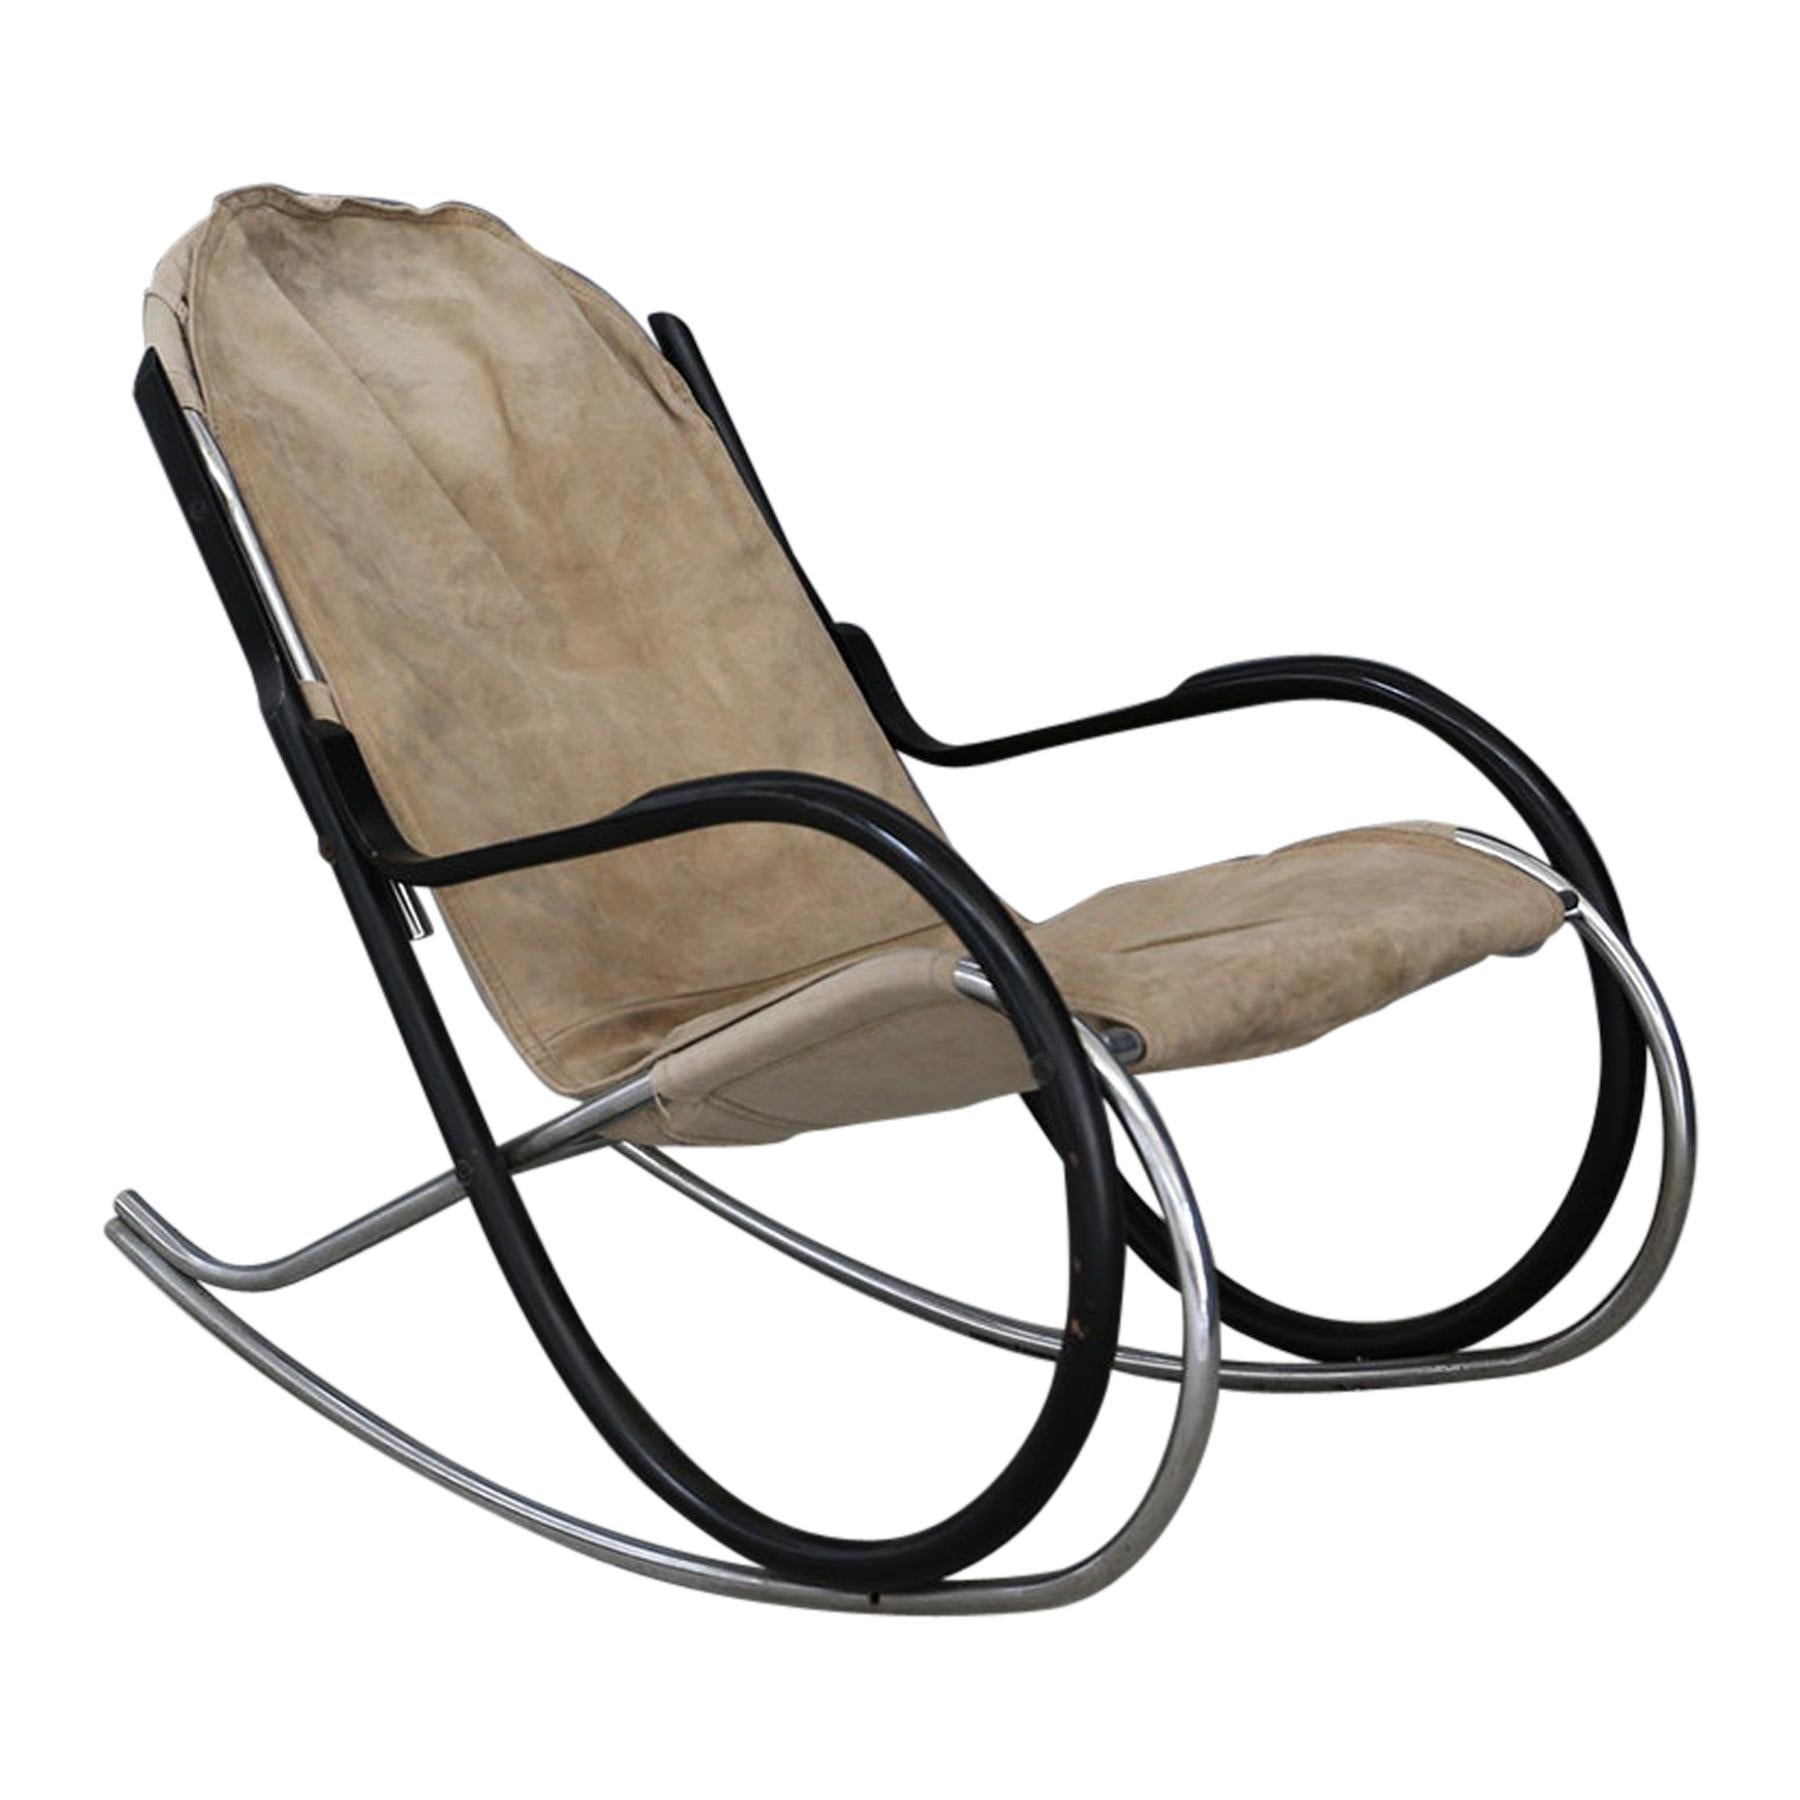 Nonna Rocking Chair Designed by Paul Tuttle for Strassle International